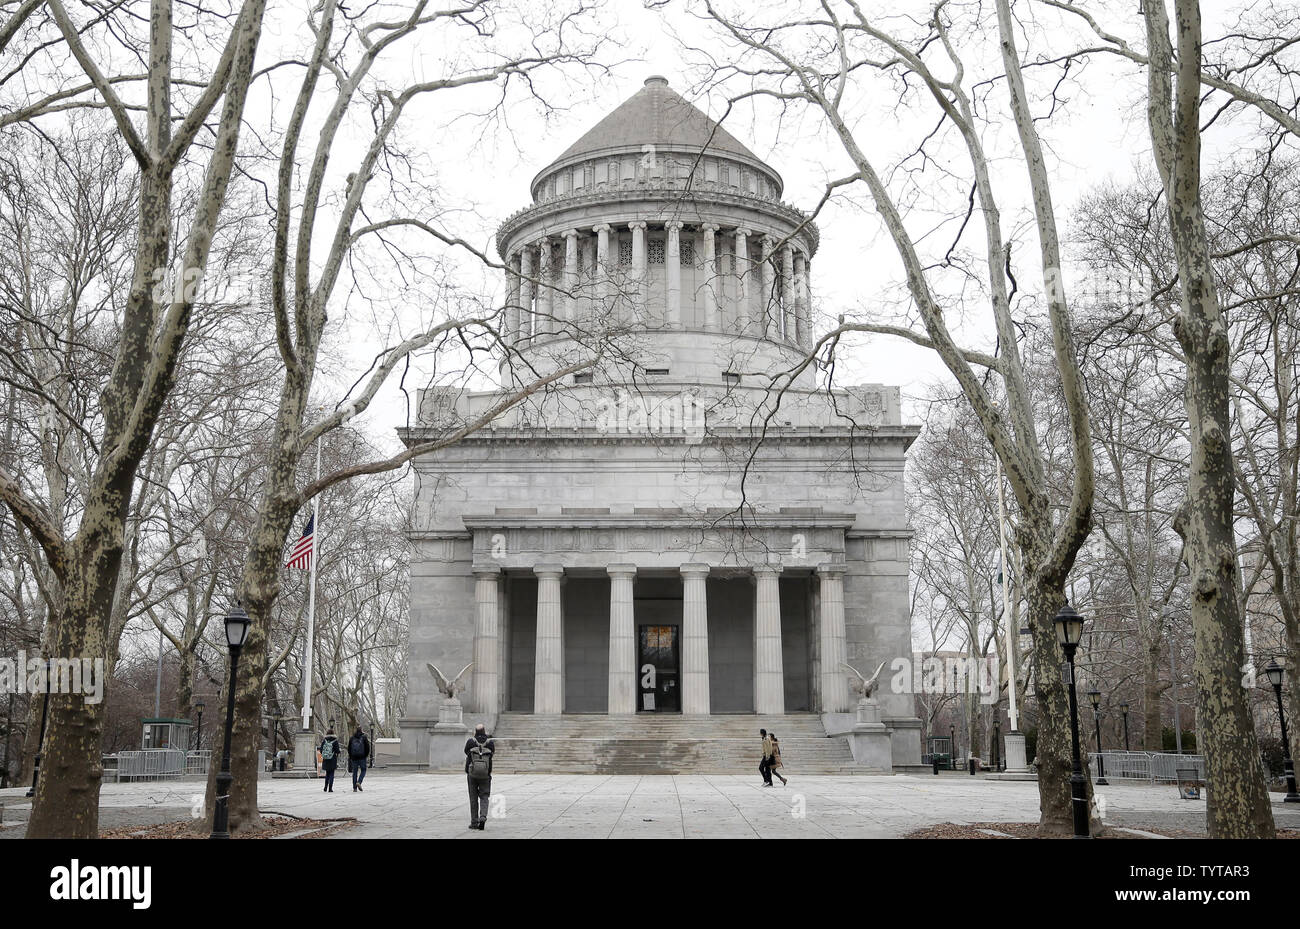 Visitors and pedestrians walk the grounds around Grant's Tomb formally known as General Grant National Memorial on President's Day in New York City on February 19, 2018. The final resting place of President Ulysses S. Grant and his wife, Julia, is the largest mausoleum in North America. President's Day is an American holiday celebrated on the third Monday in February and was originally established in 1885 in recognition of President George Washington.      Photo by John Angelillo/UPI Stock Photo